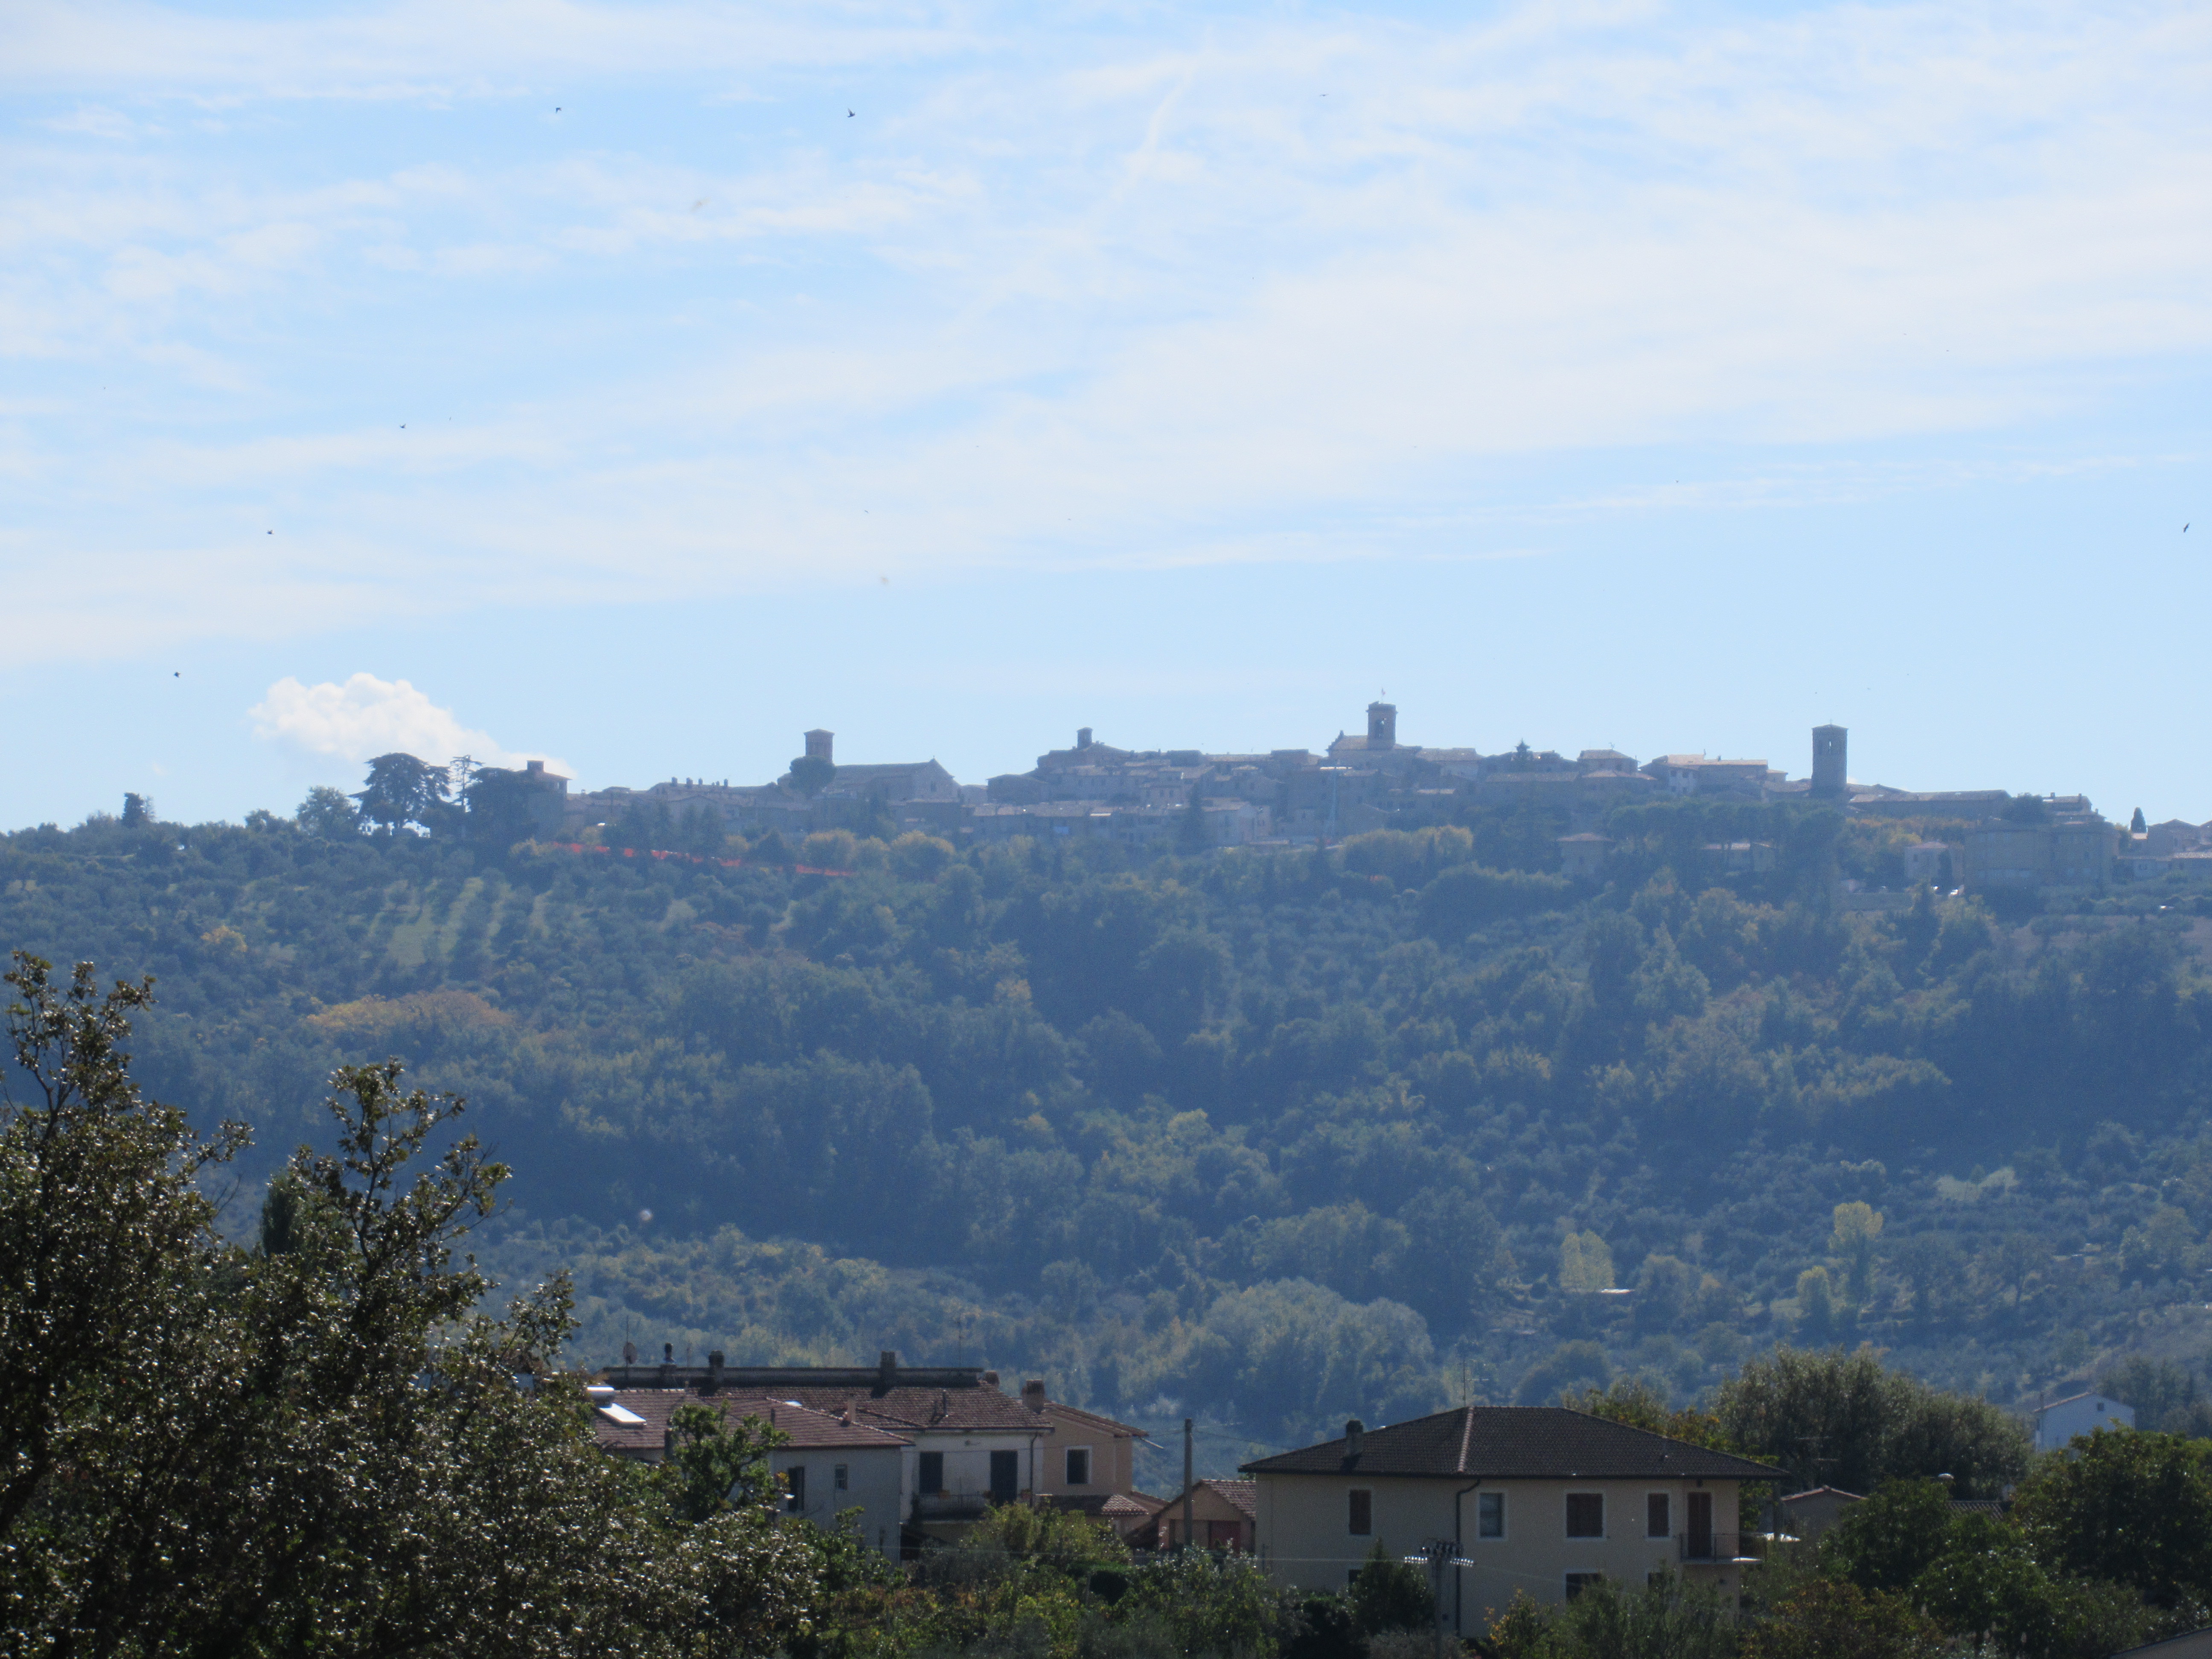 A view of Montefalco, "the balcony of Umbria," from the valley below. Photo by Heidi Davis.